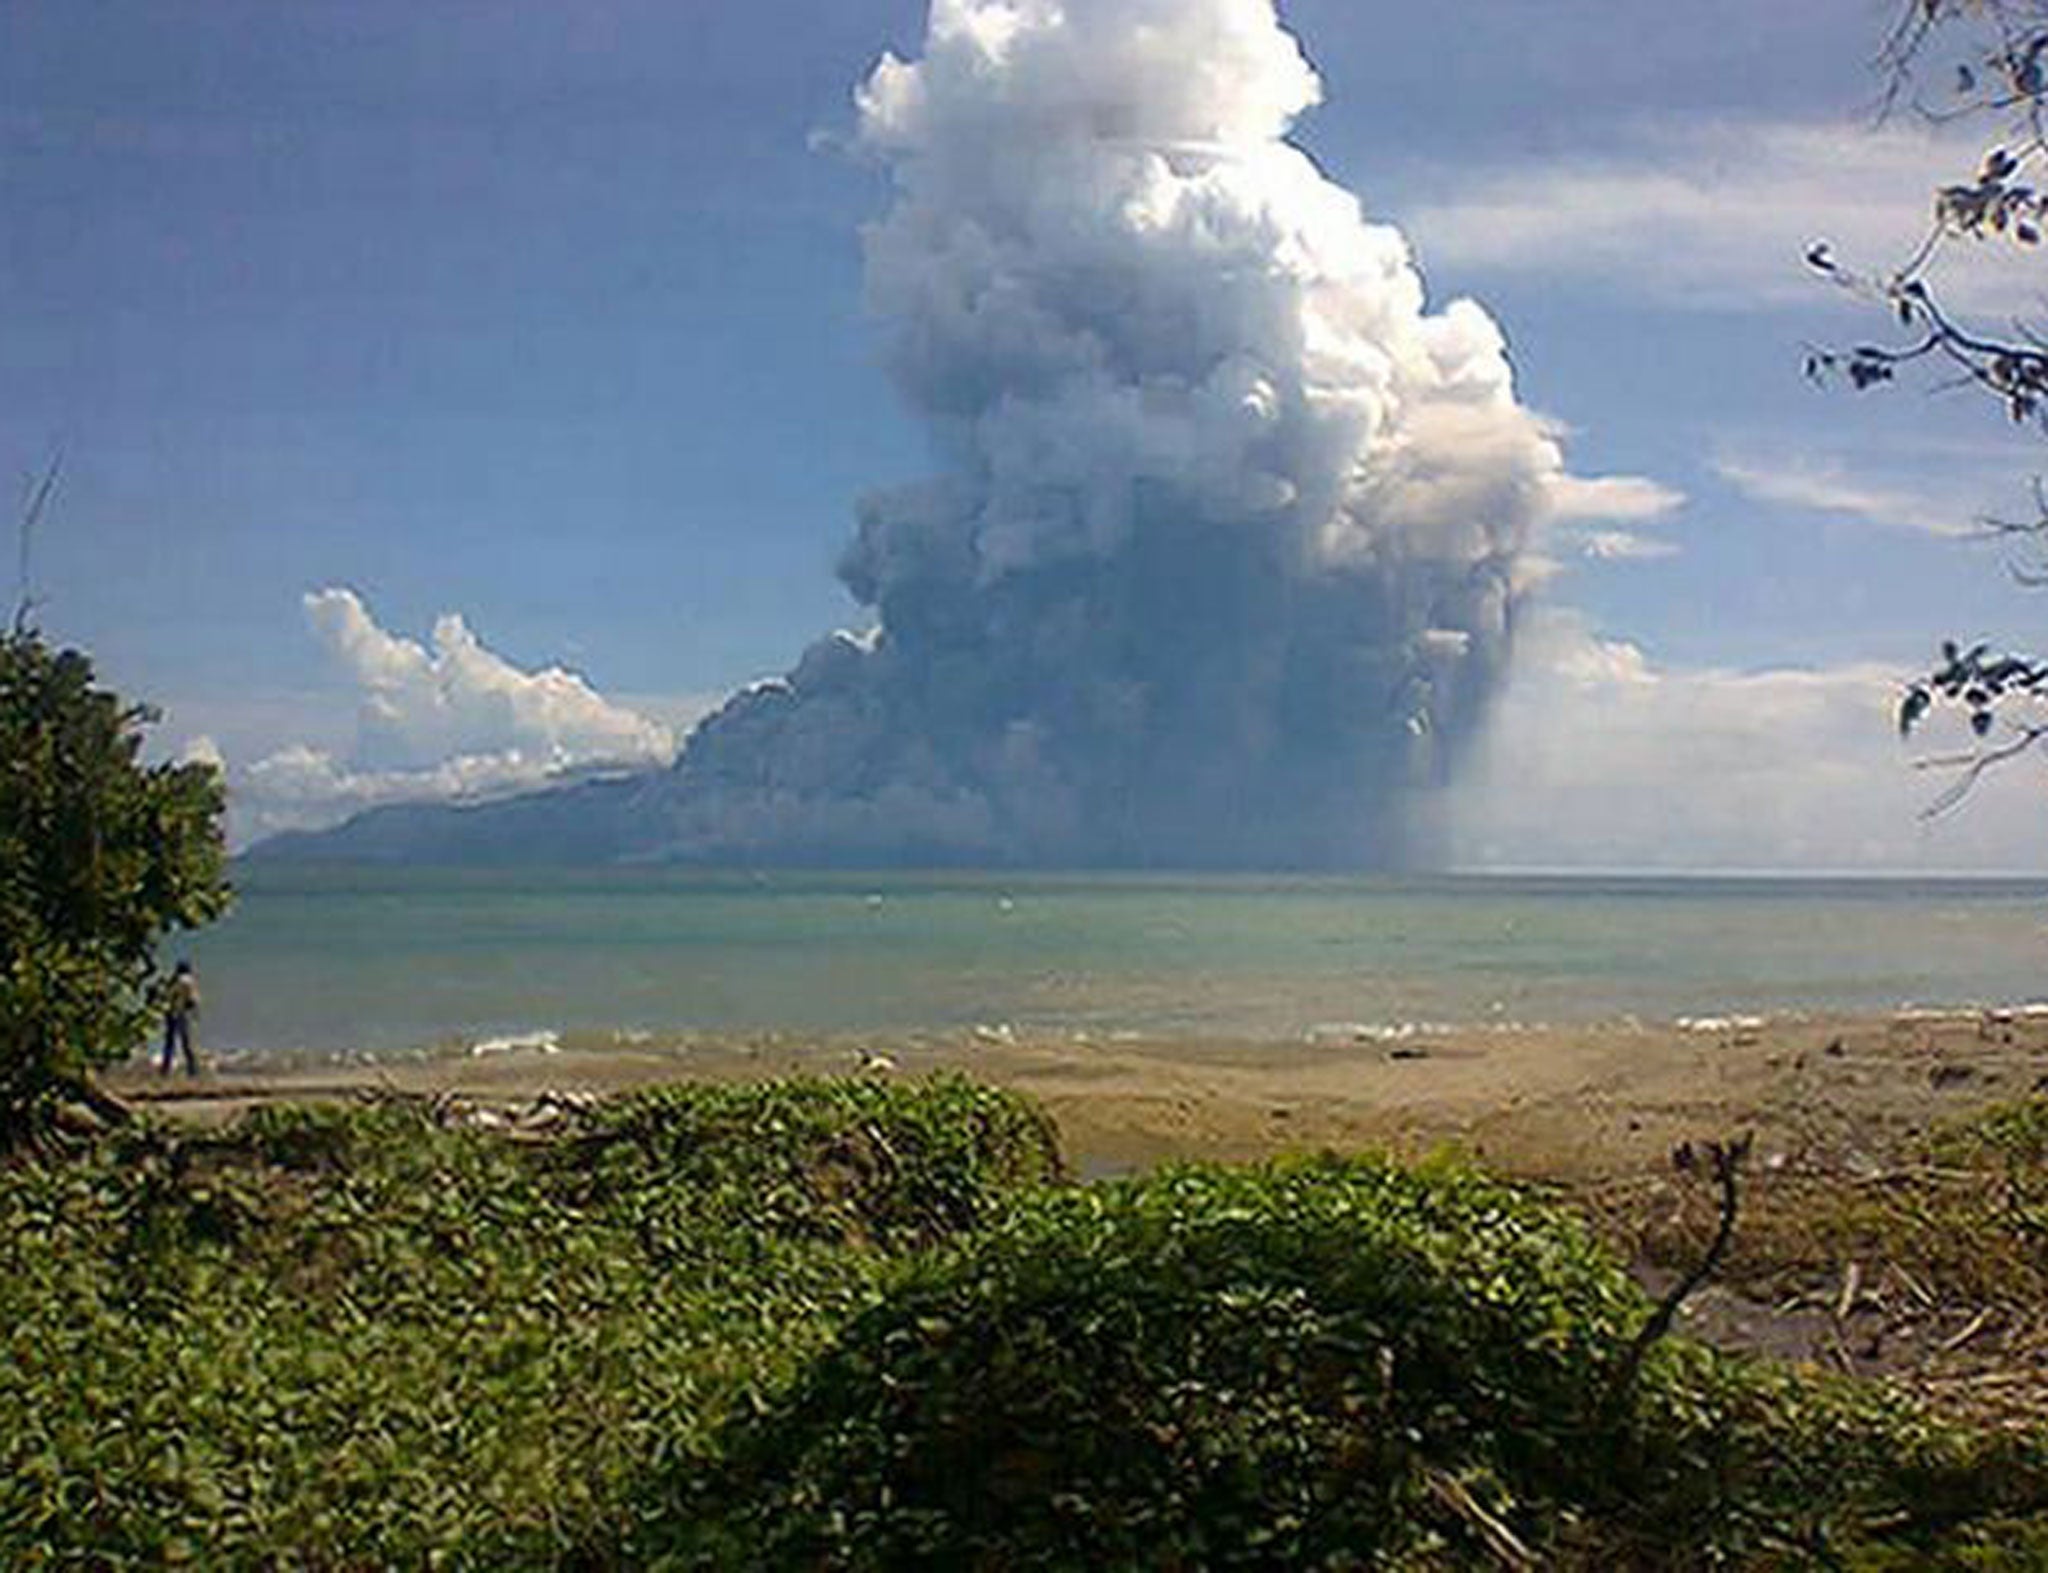 A photo taken today from the Maurole district of East Nusa Tenggara province with a camera phone